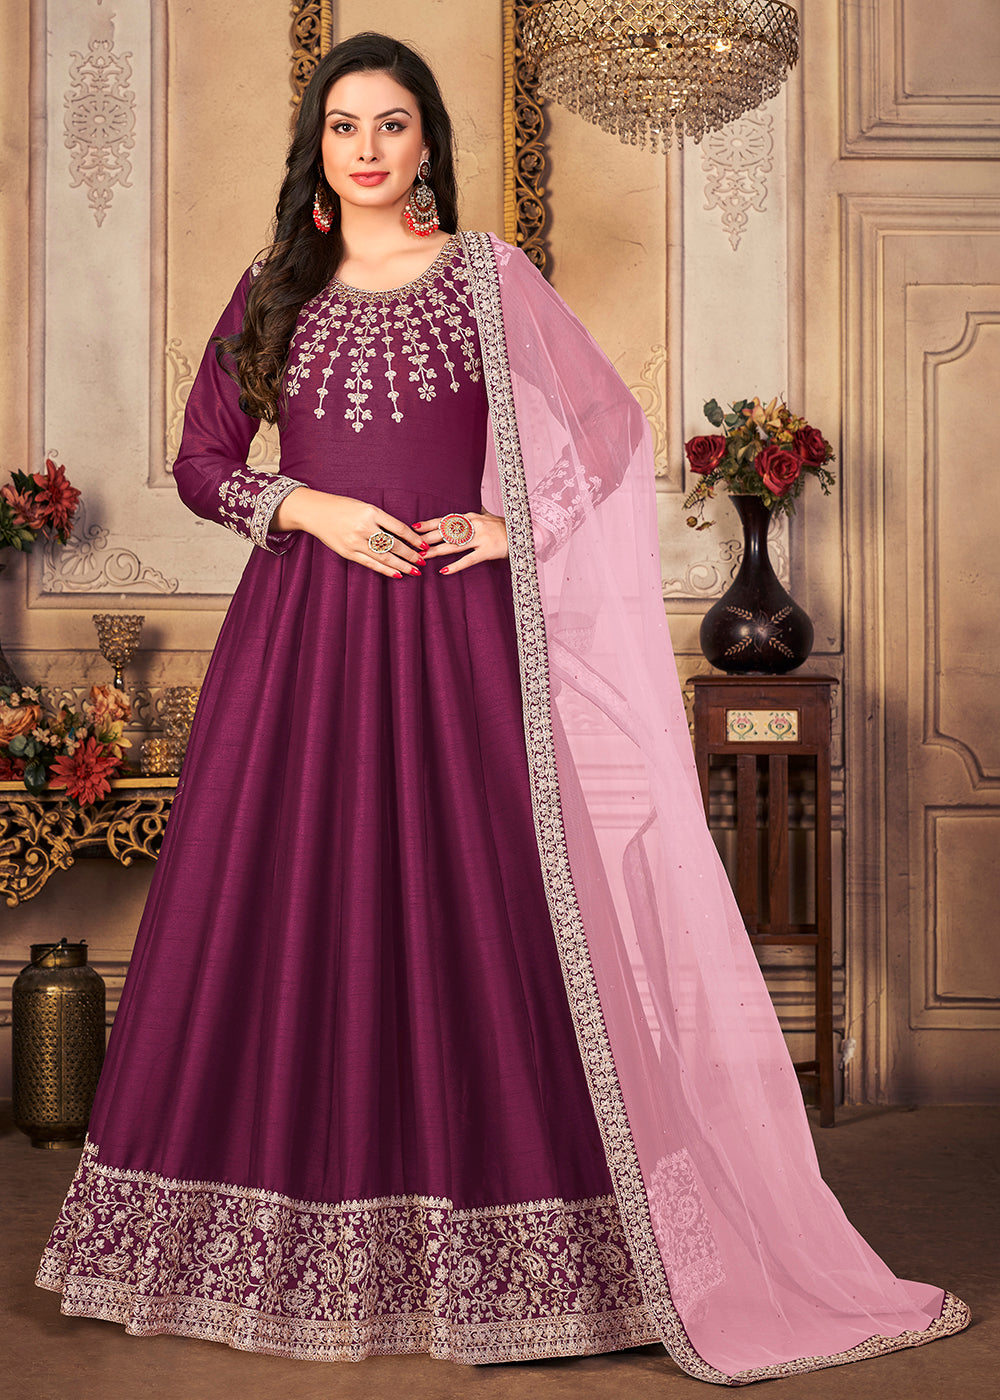 Buy Now Festive Charming Purple Embroidered Silk Anarkali Suit Online in Canada at Empress Clothing.